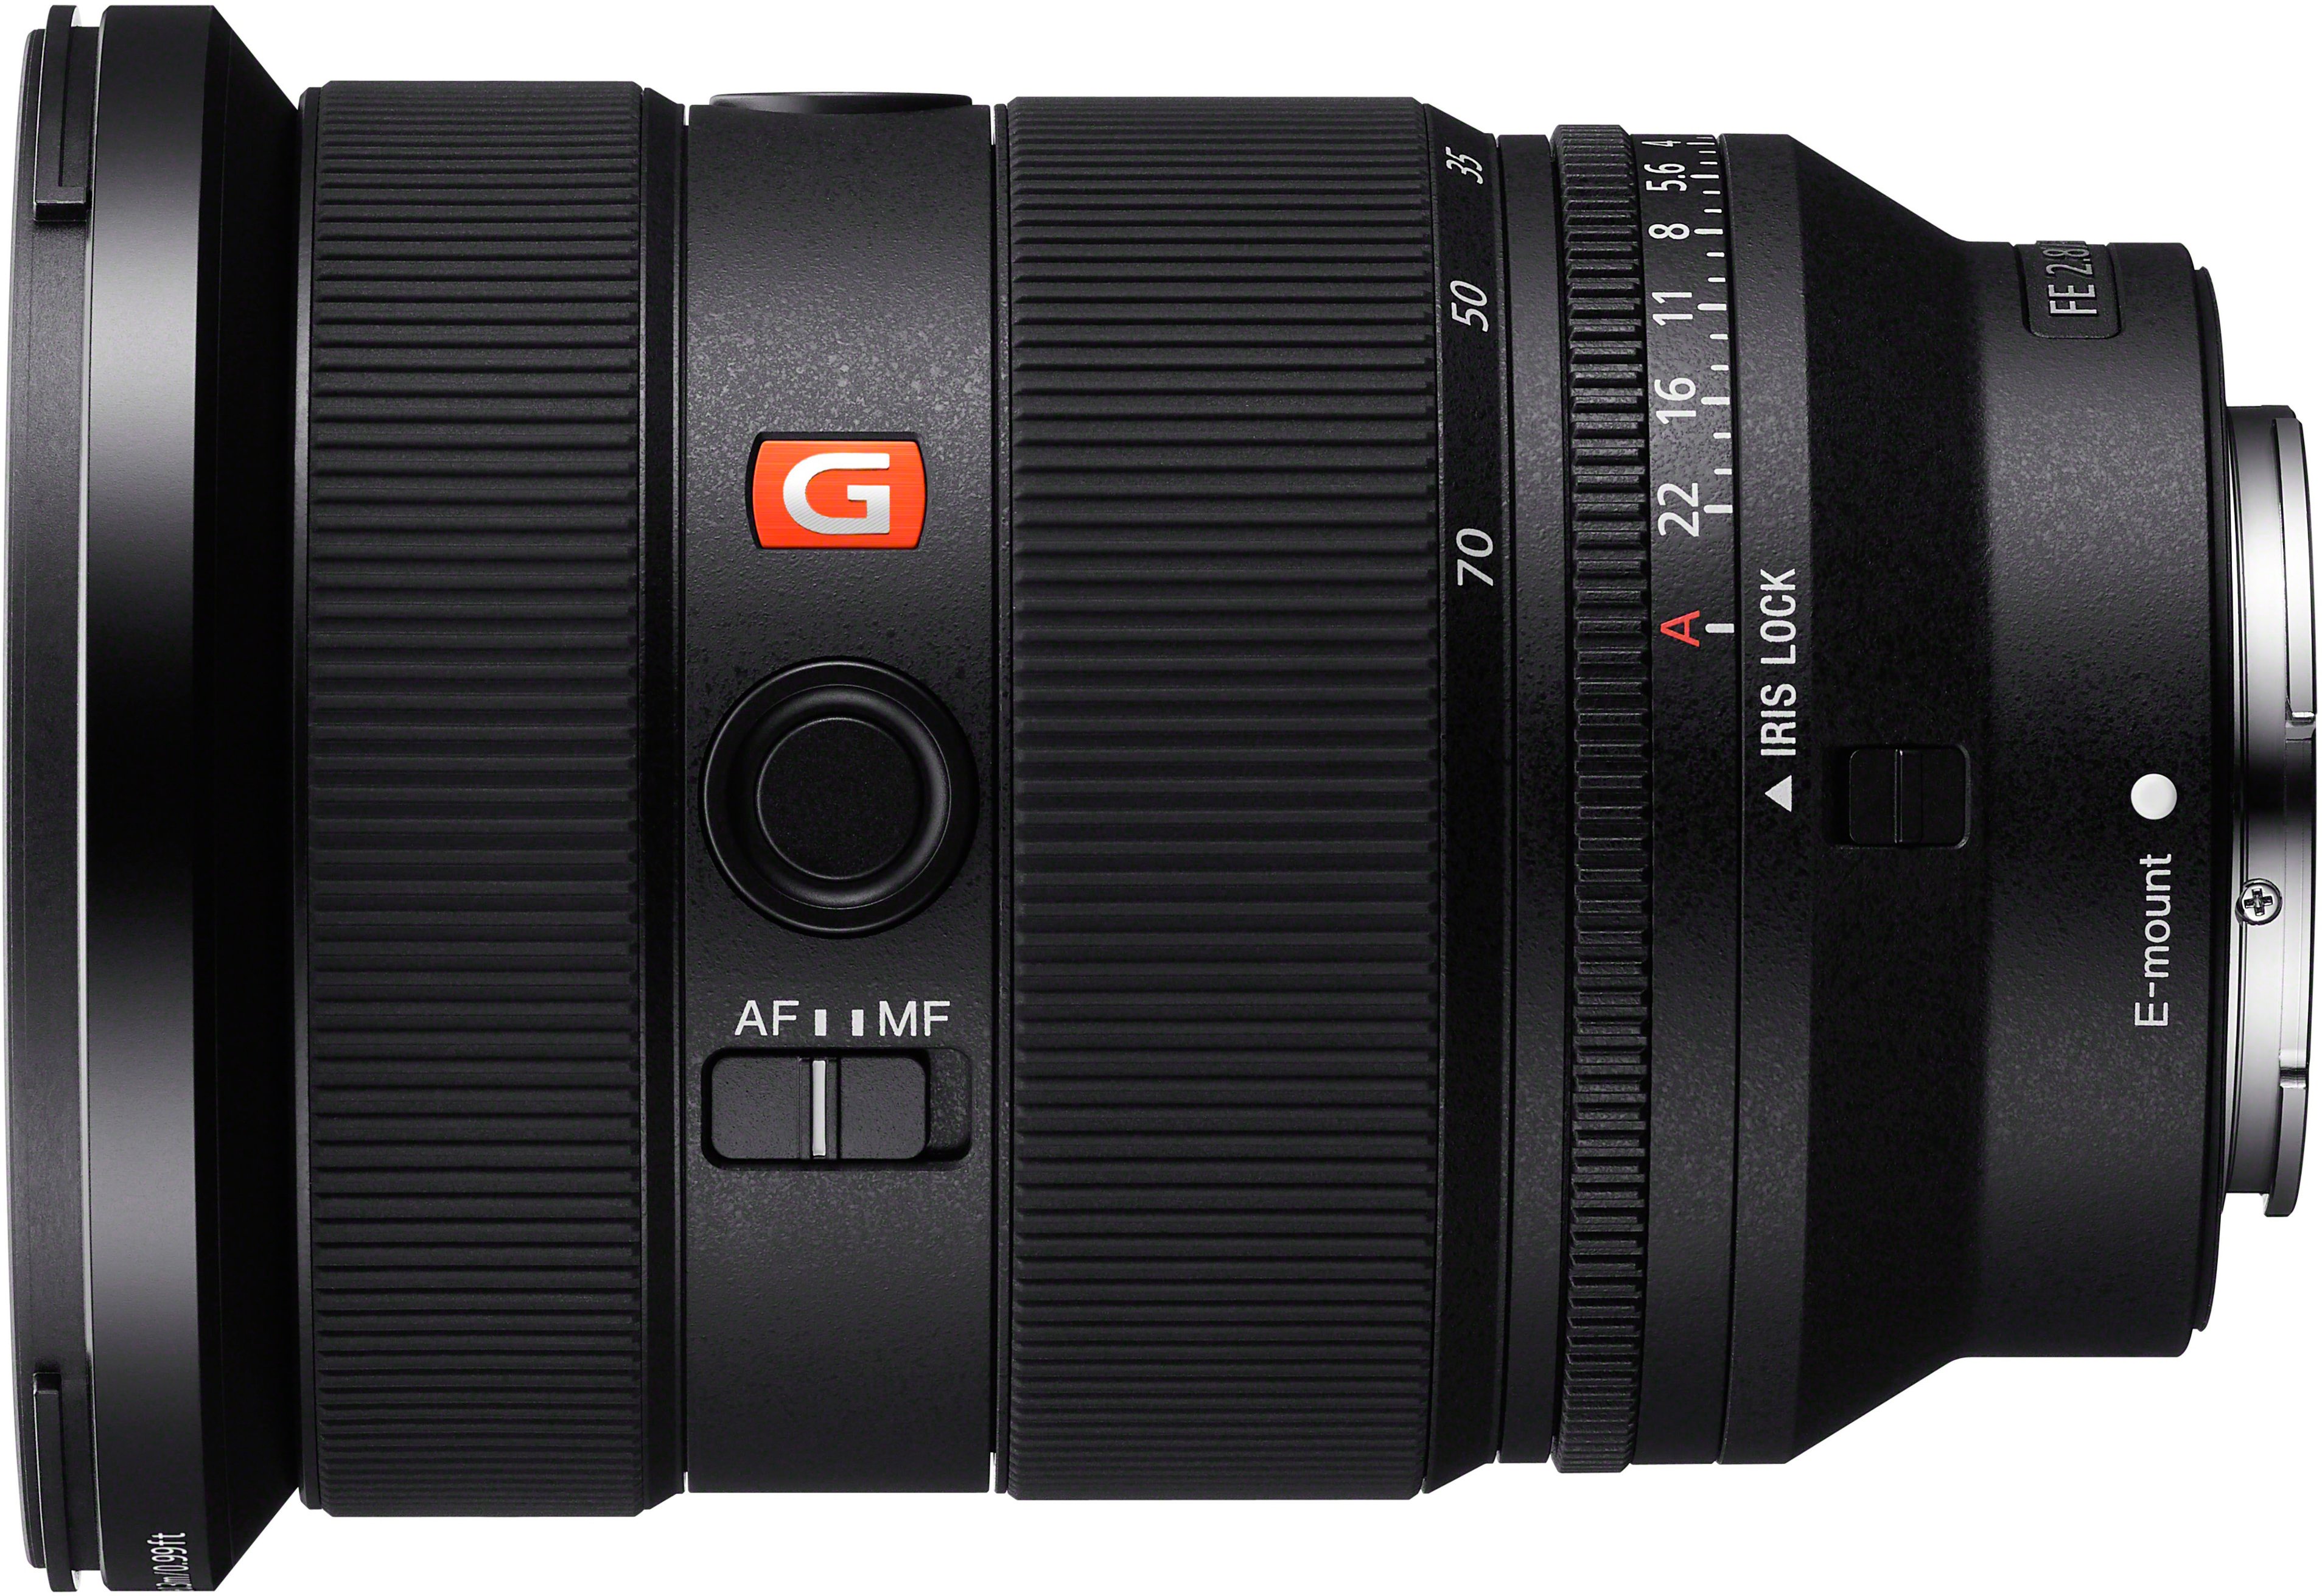 Review Sigma 24-70 mm f/2.8 Art - Focus Review